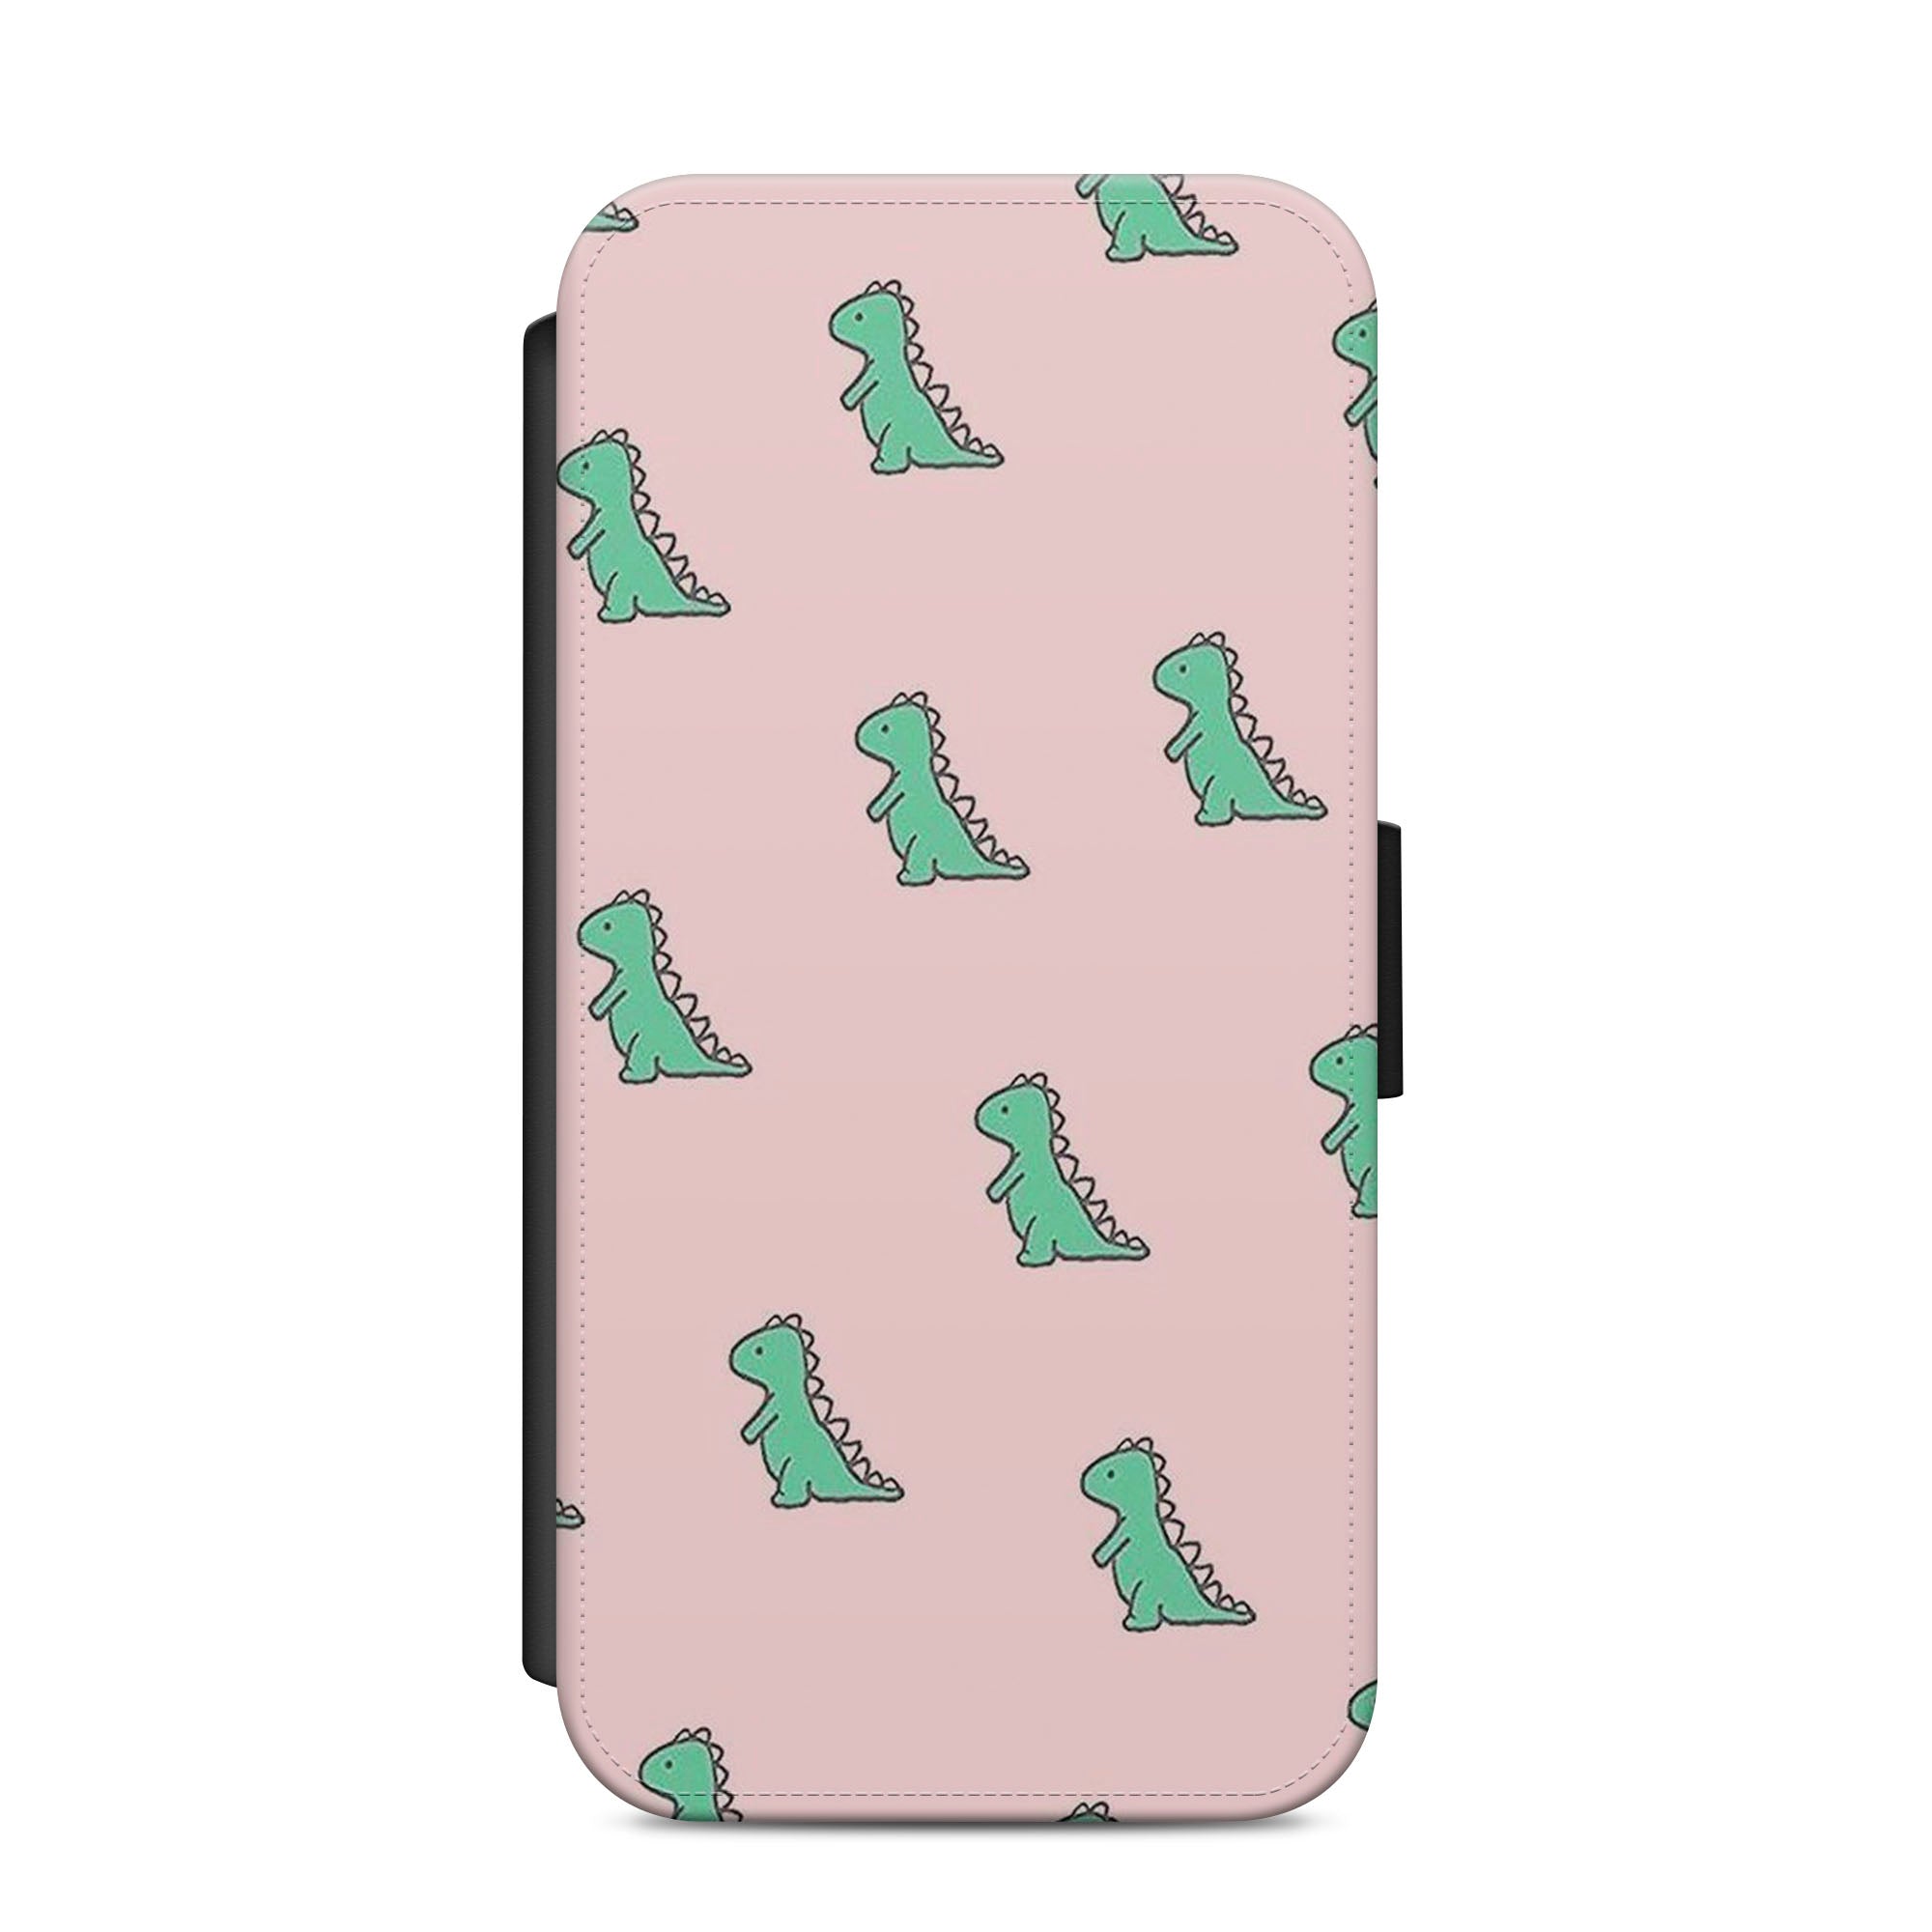 Cute Pastel Dino Dinosaur Faux Leather Flip Case Wallet for iPhone / Samsung